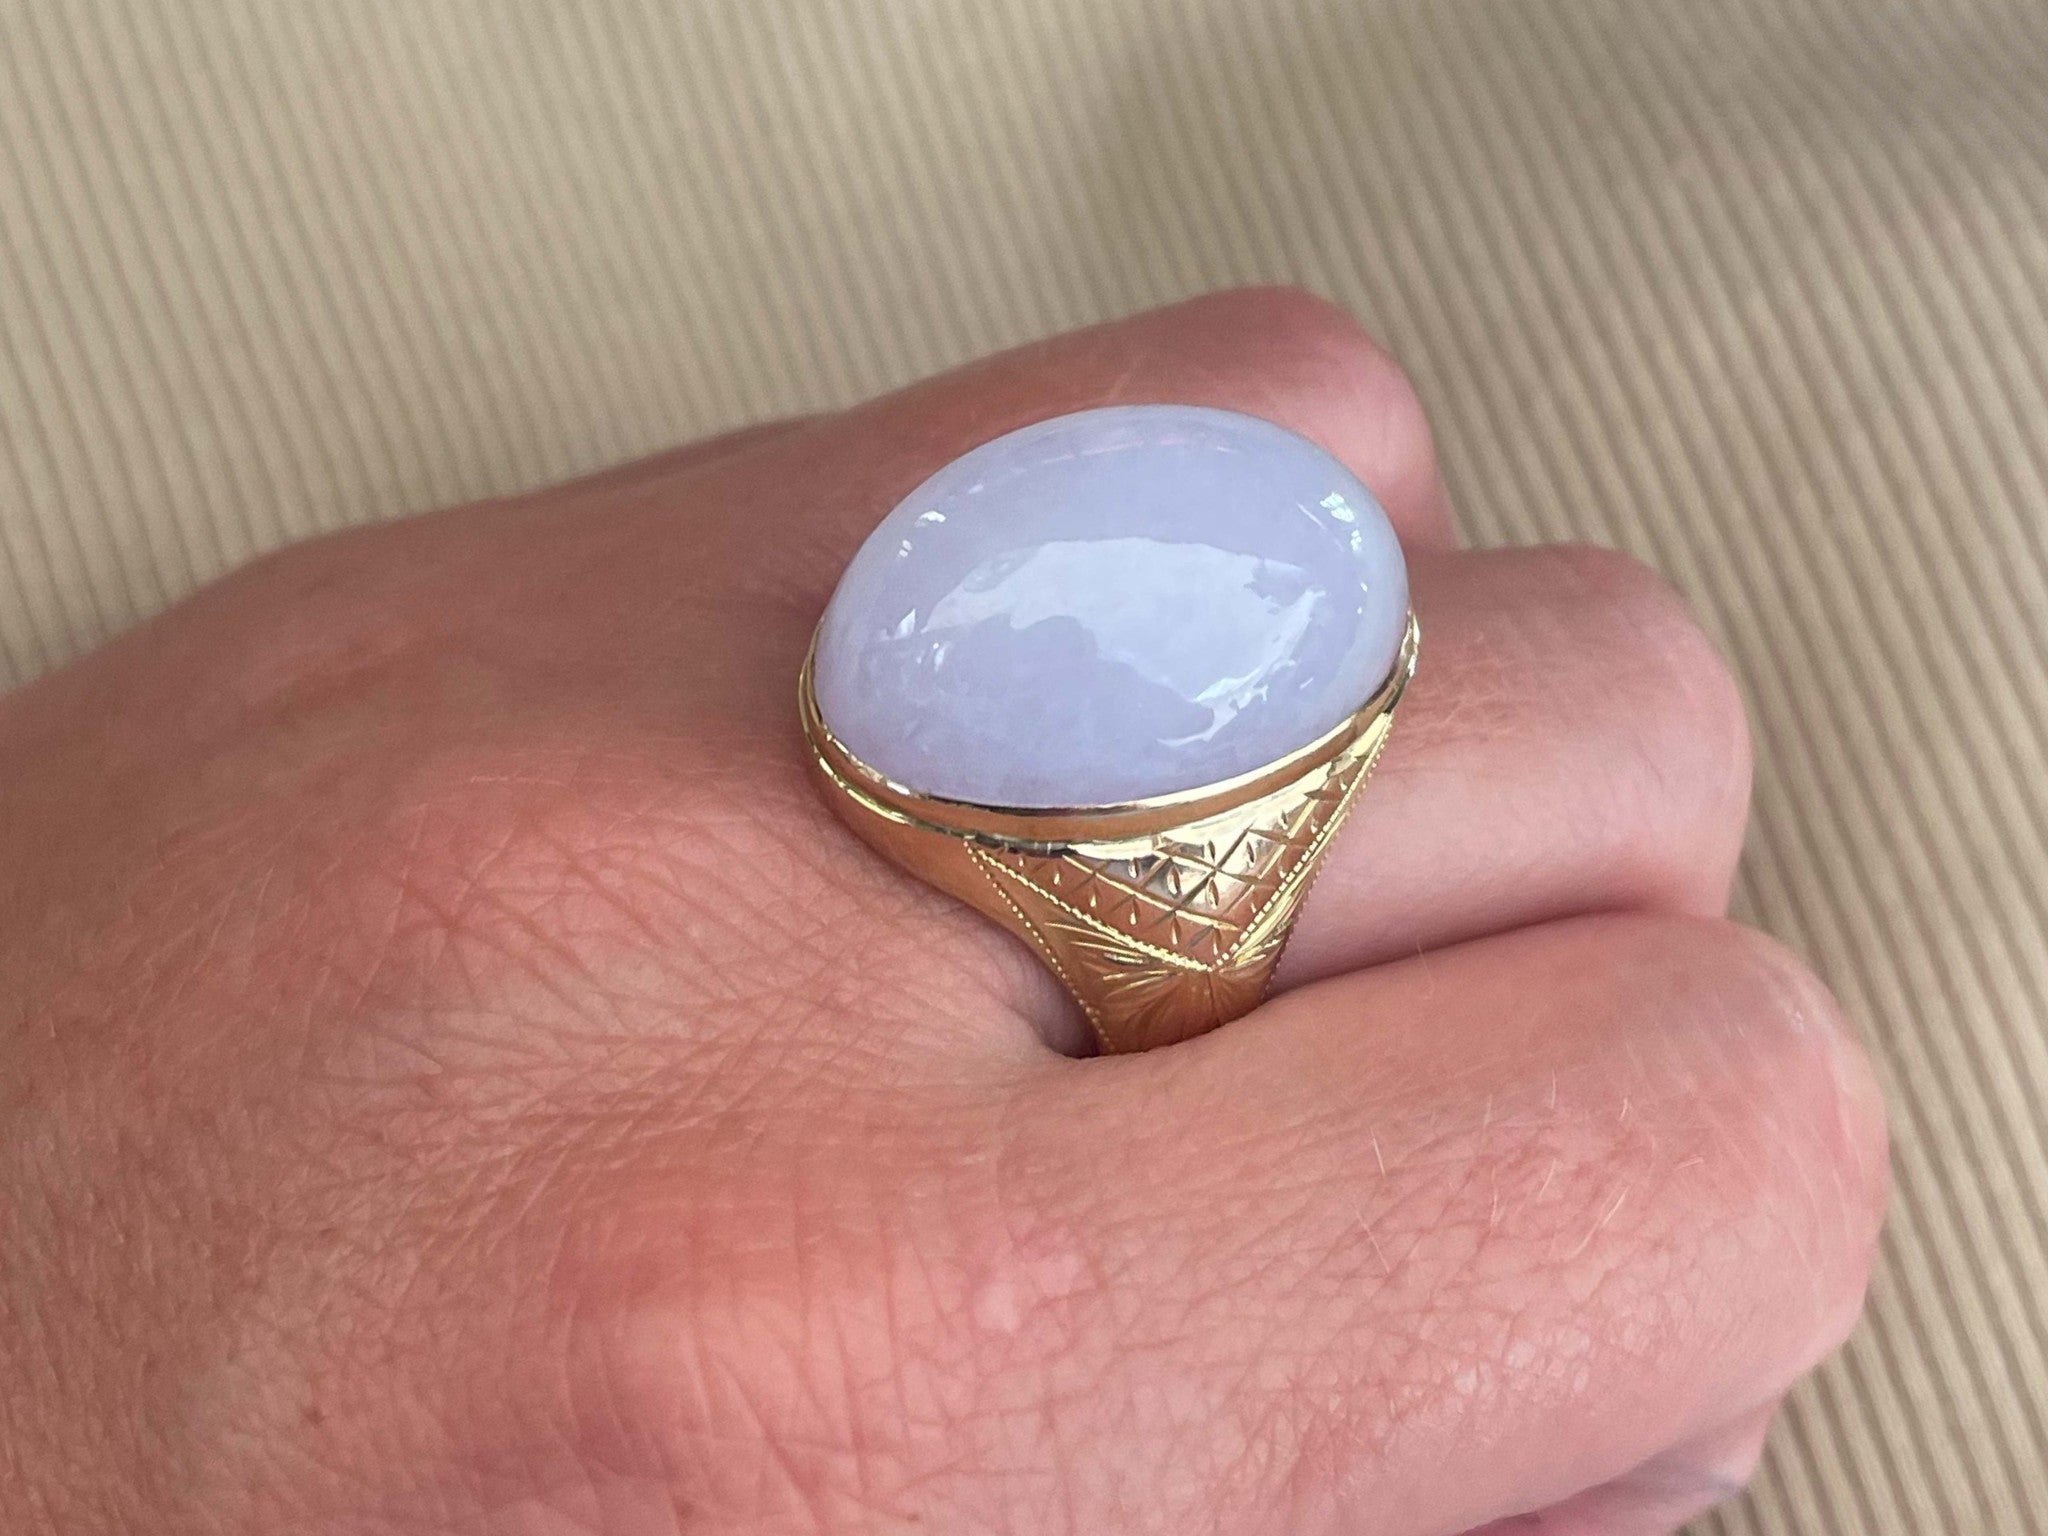 49 Carat Lavender Jade Double Cabochon Ring in 14k Yellow Gold